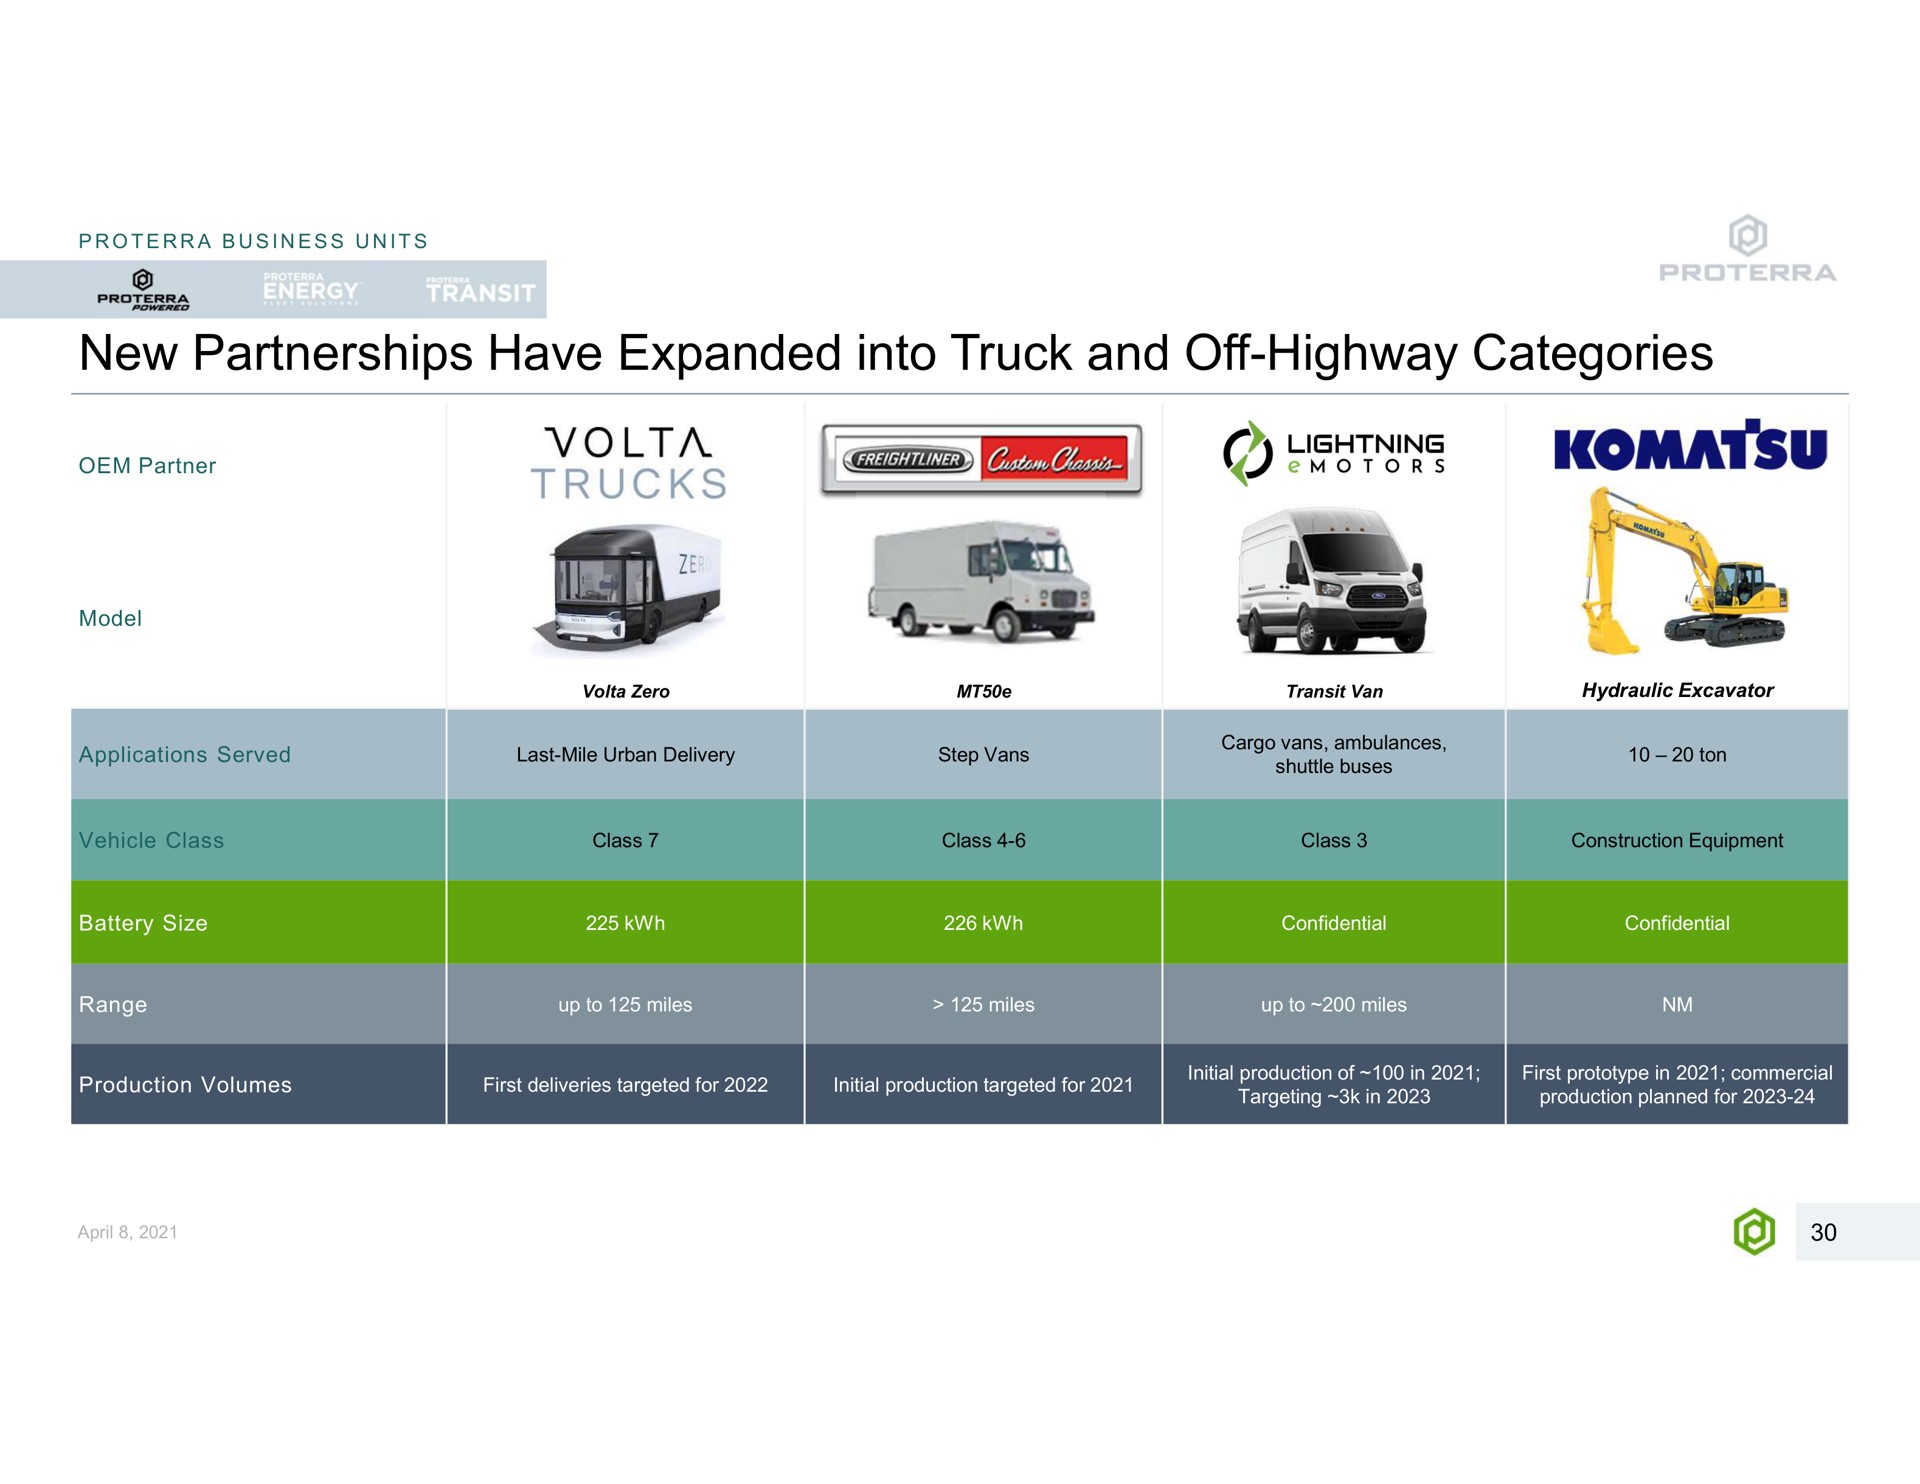 new partnerships have expanded into truck and off highway categories business units partner trucks model transit van hydraulic excavator battery size an confidential confidential range up to miles miles up to miles production volumes first deliveries targeted for initial production targeted for initial production of in first prototype in commercial | Proterra